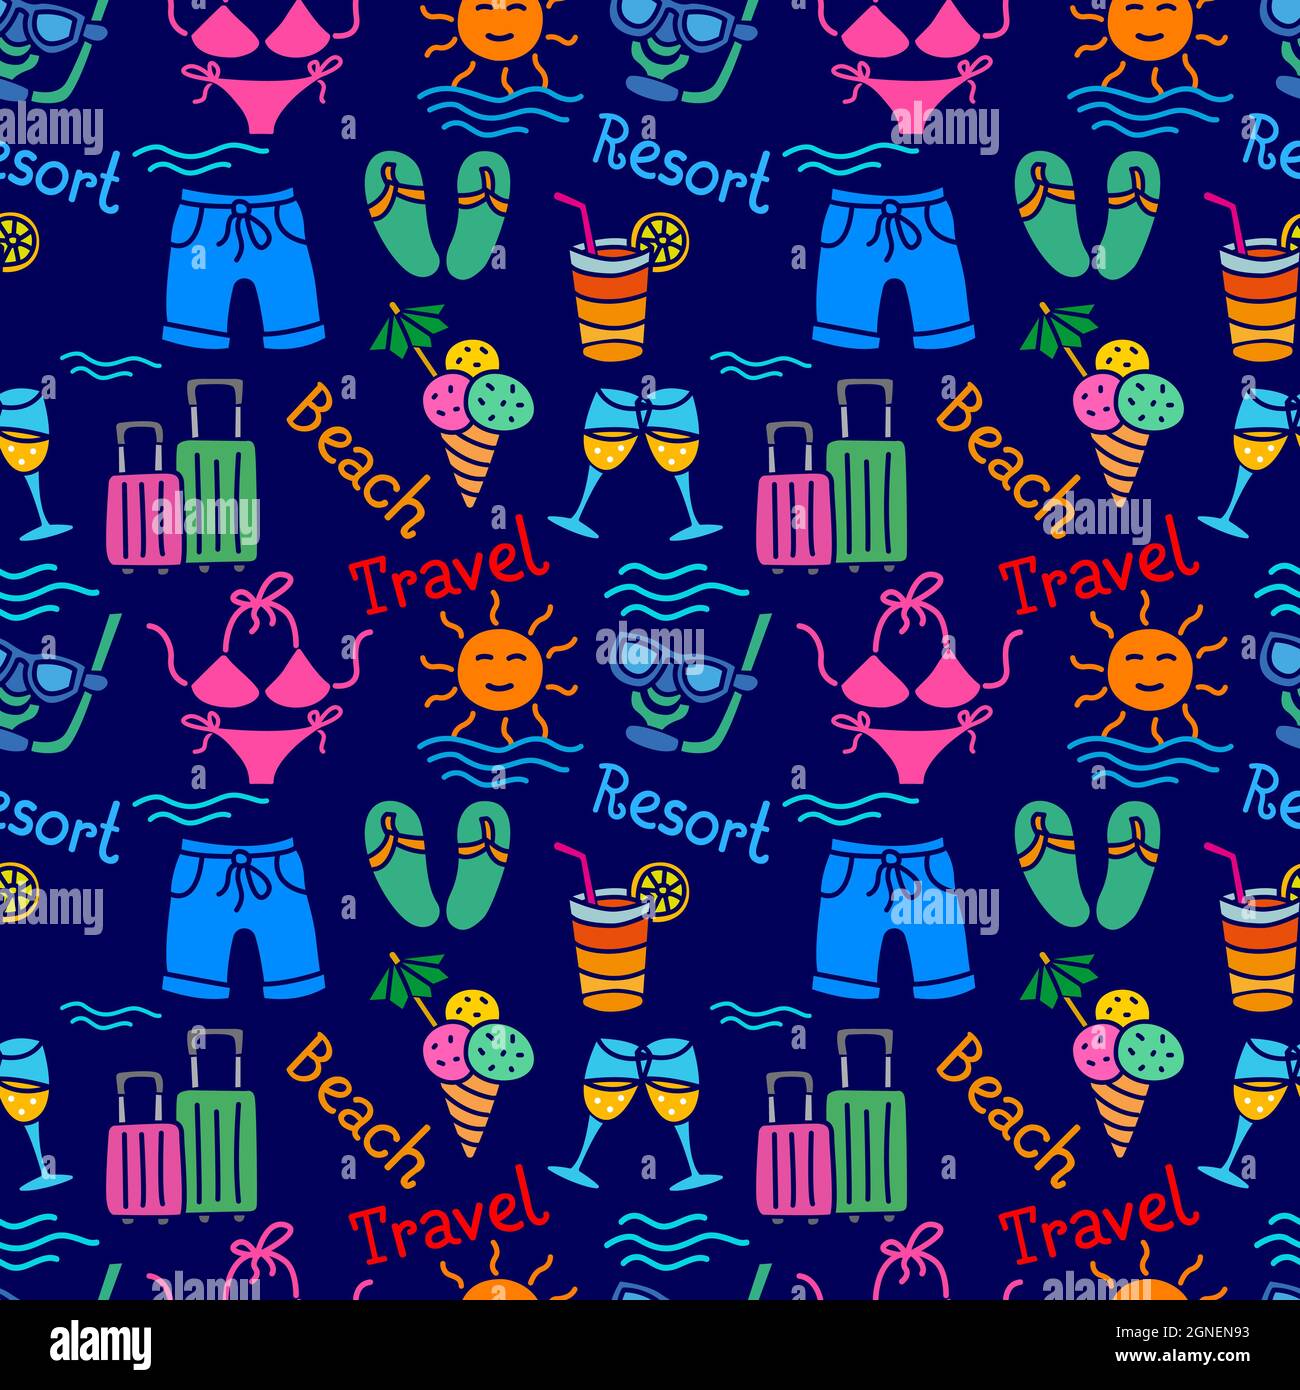 travel vacation and beach resort colorful seamless pattern Stock Vector